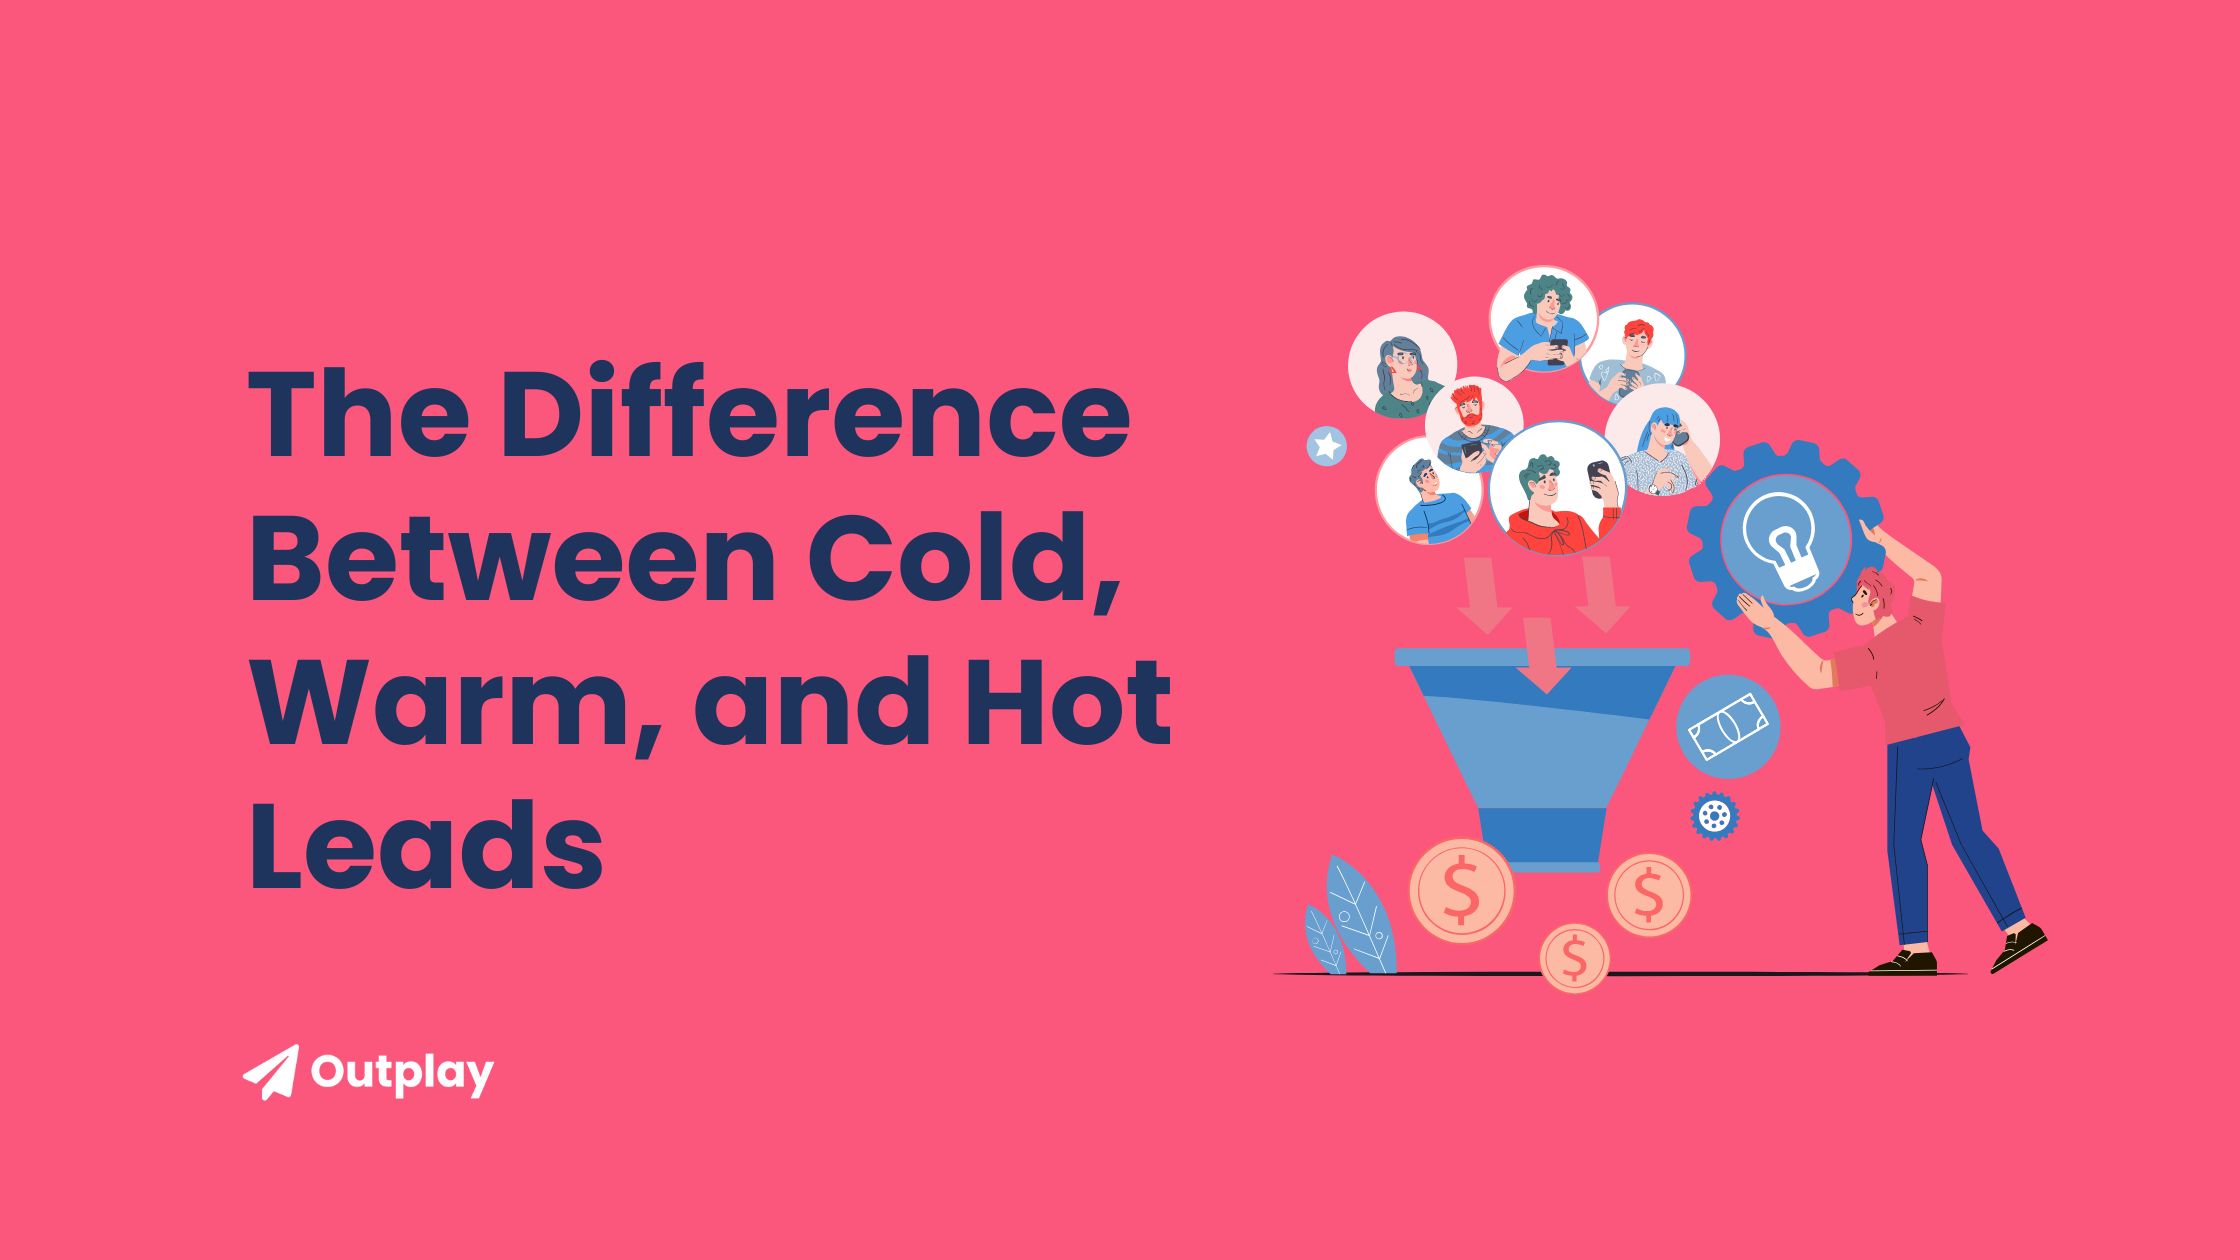 Understanding Sales Leads: The Difference Between Cold, Warm, and Hot Leads